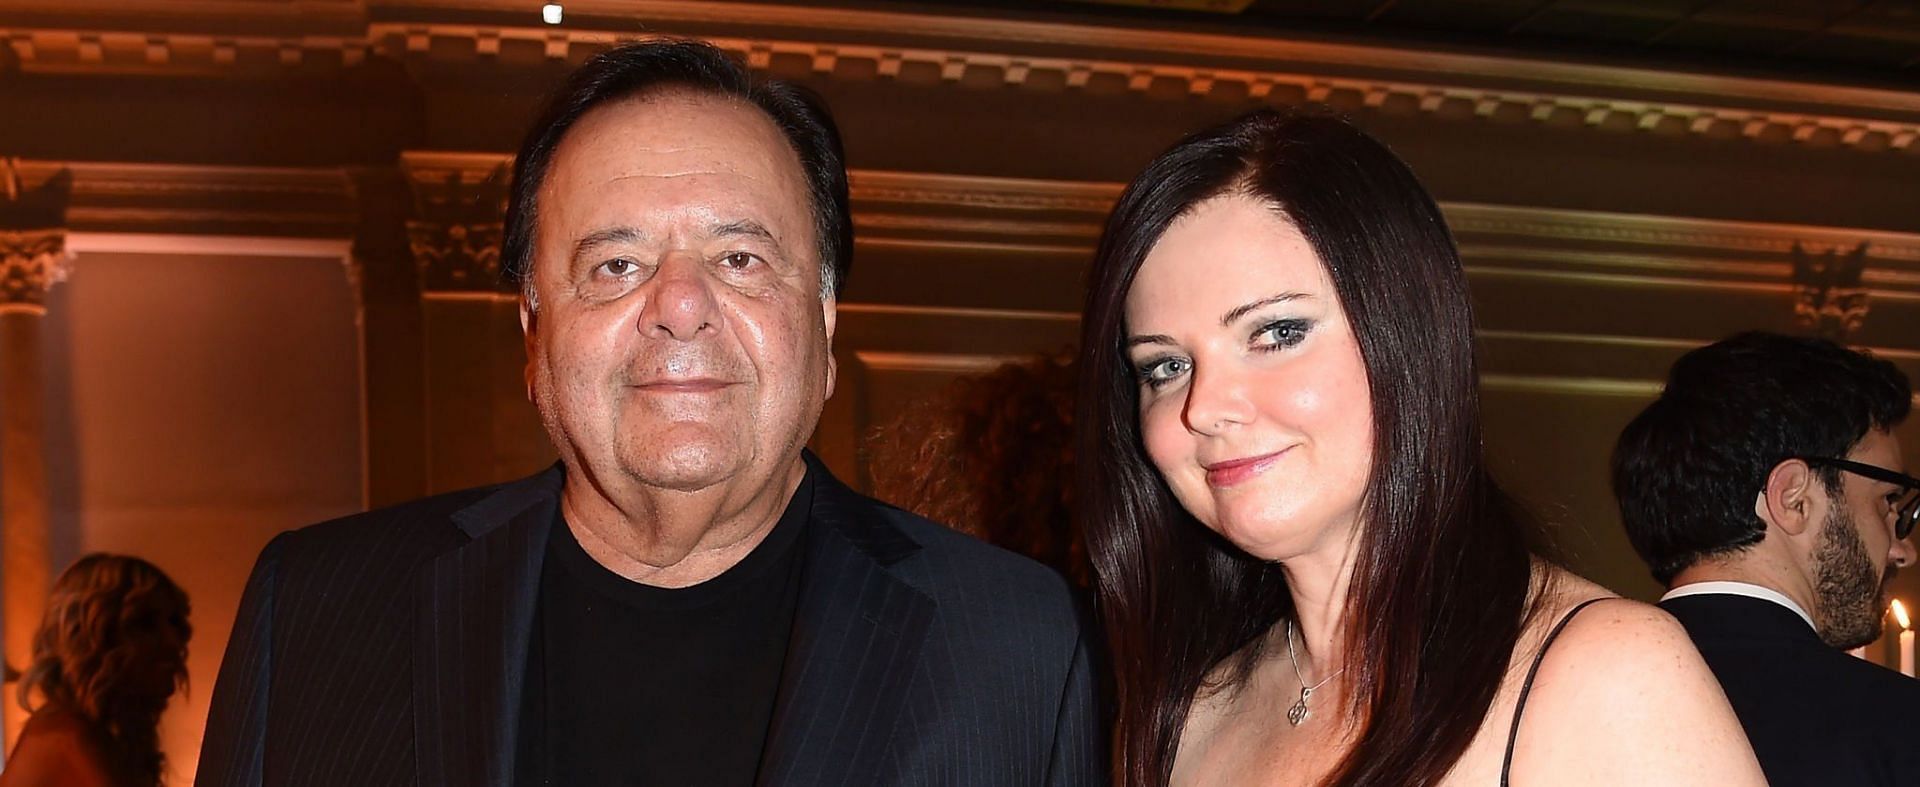 Paul Sorvino and Dee Dee Benkie tied the knot in 2014 (Image via Getty Images)